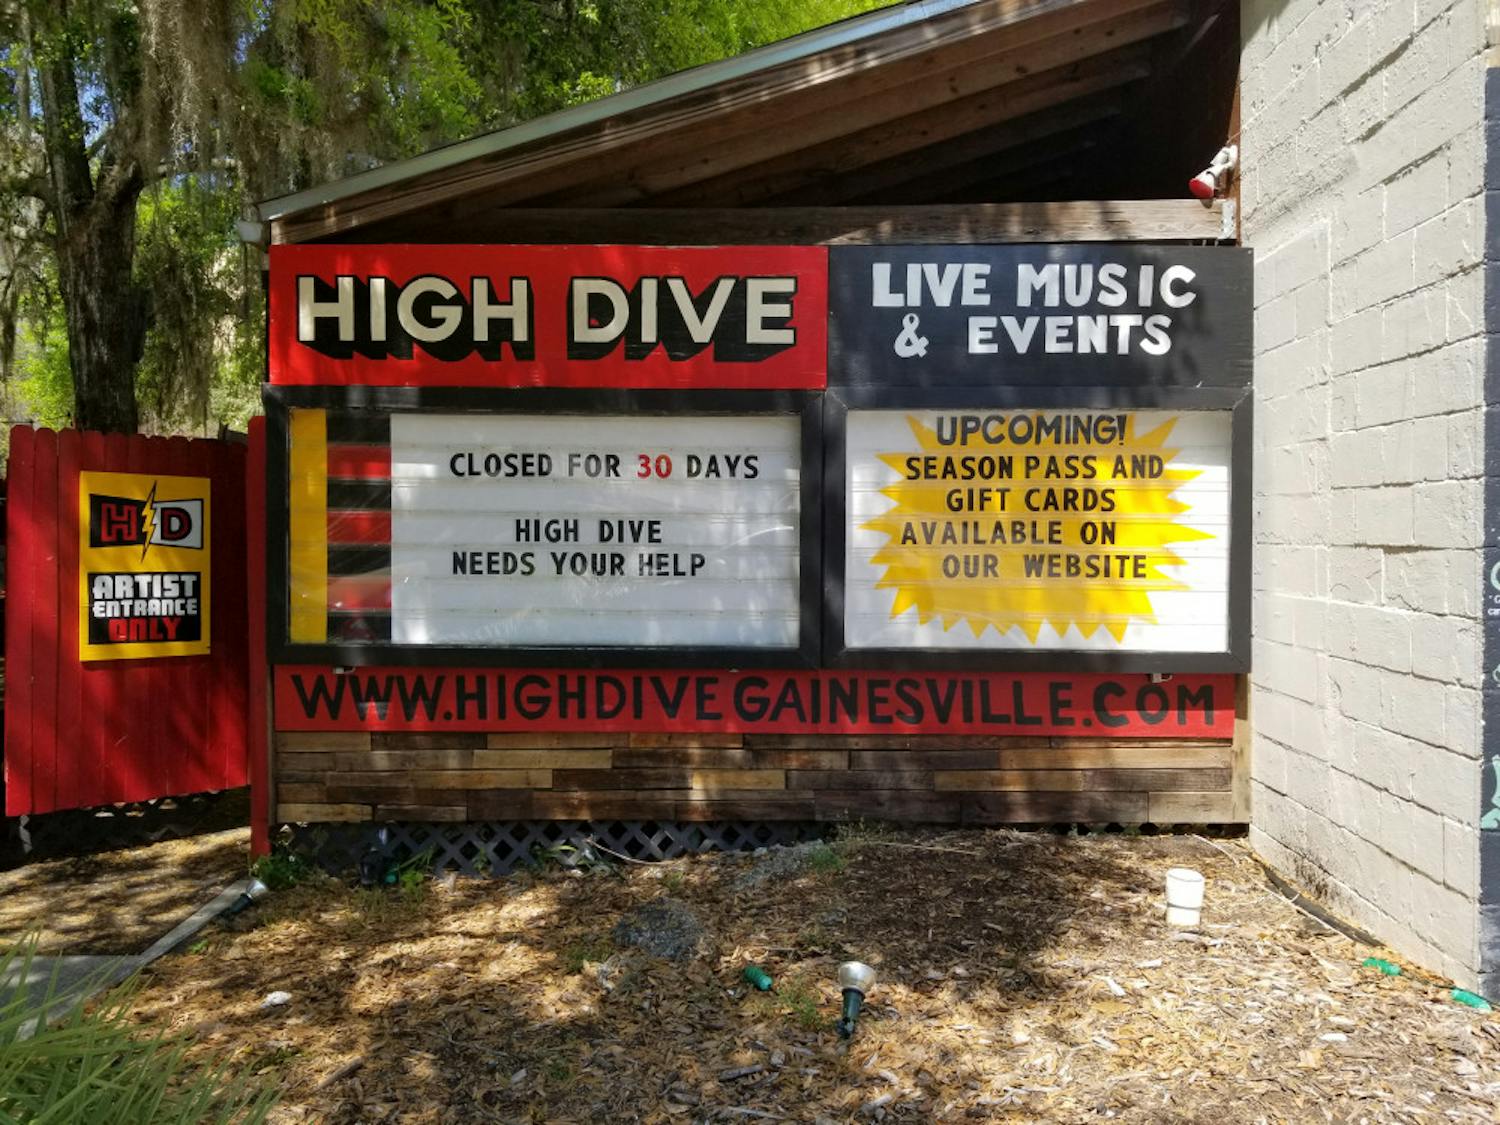 Gainesville’s The Florida Theatre, High Dive and The Fest punk festival, have joined the National Independent Venue Association, along with 1,600 other venues nationwide.